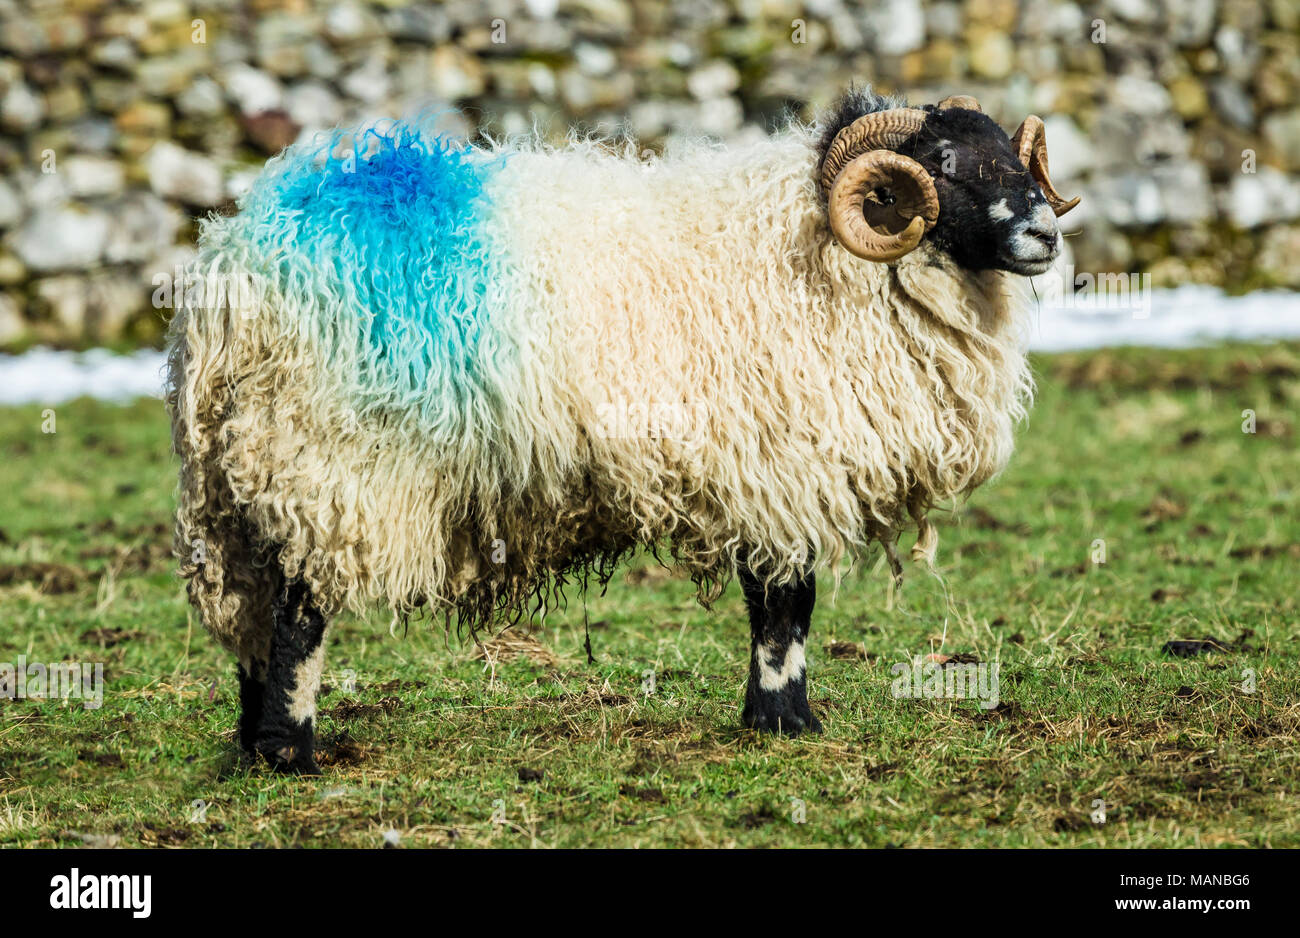 Dalesbred Ram with curly horns, facing right in the Yorkshire Dales, England, UK.  Space for copy.  Landscape Stock Photo